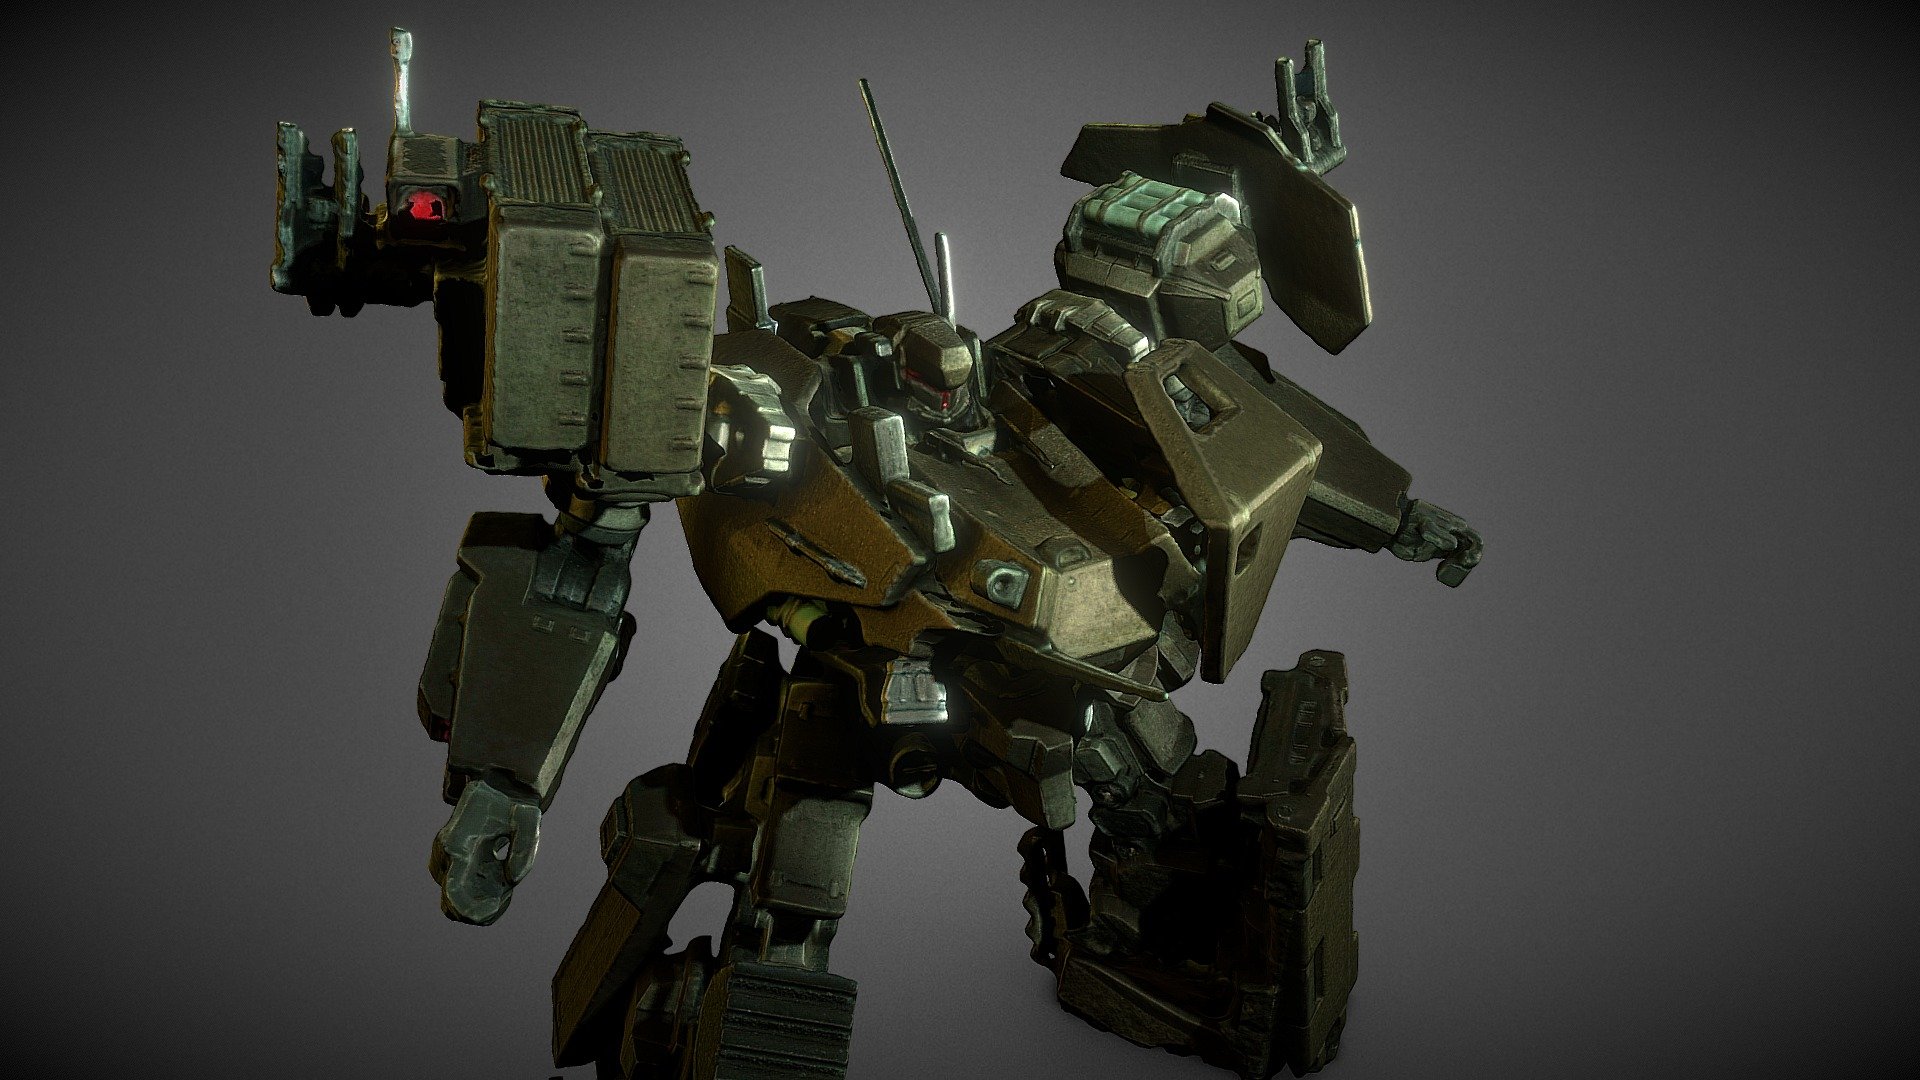 Armored Core Ucr 10a 3dscan 3d Model By Factrans 0a96b5d Sketchfab 9533